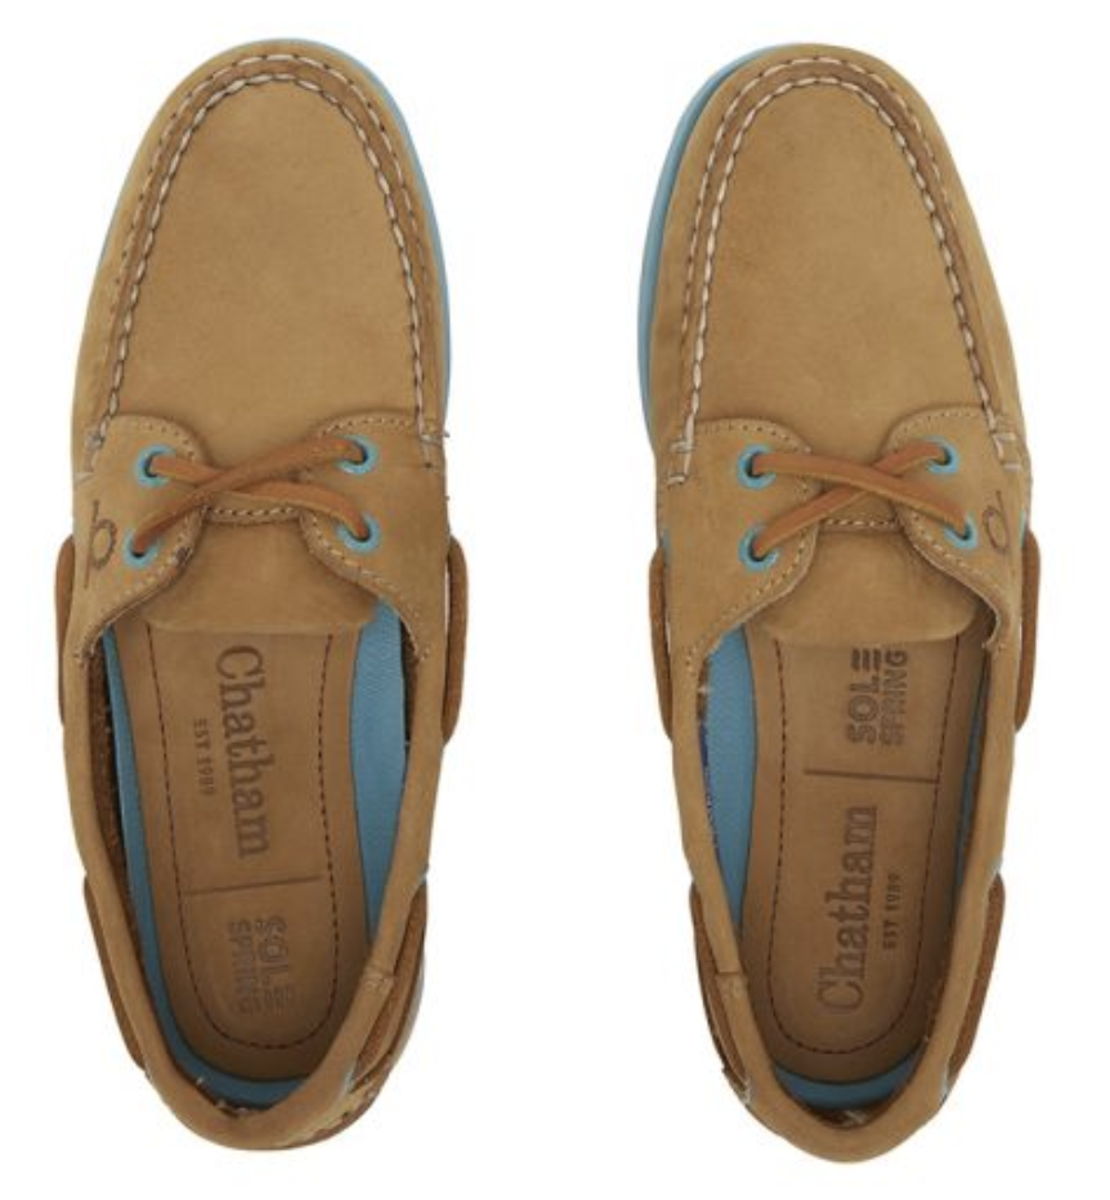 chatham pippa deck shoes